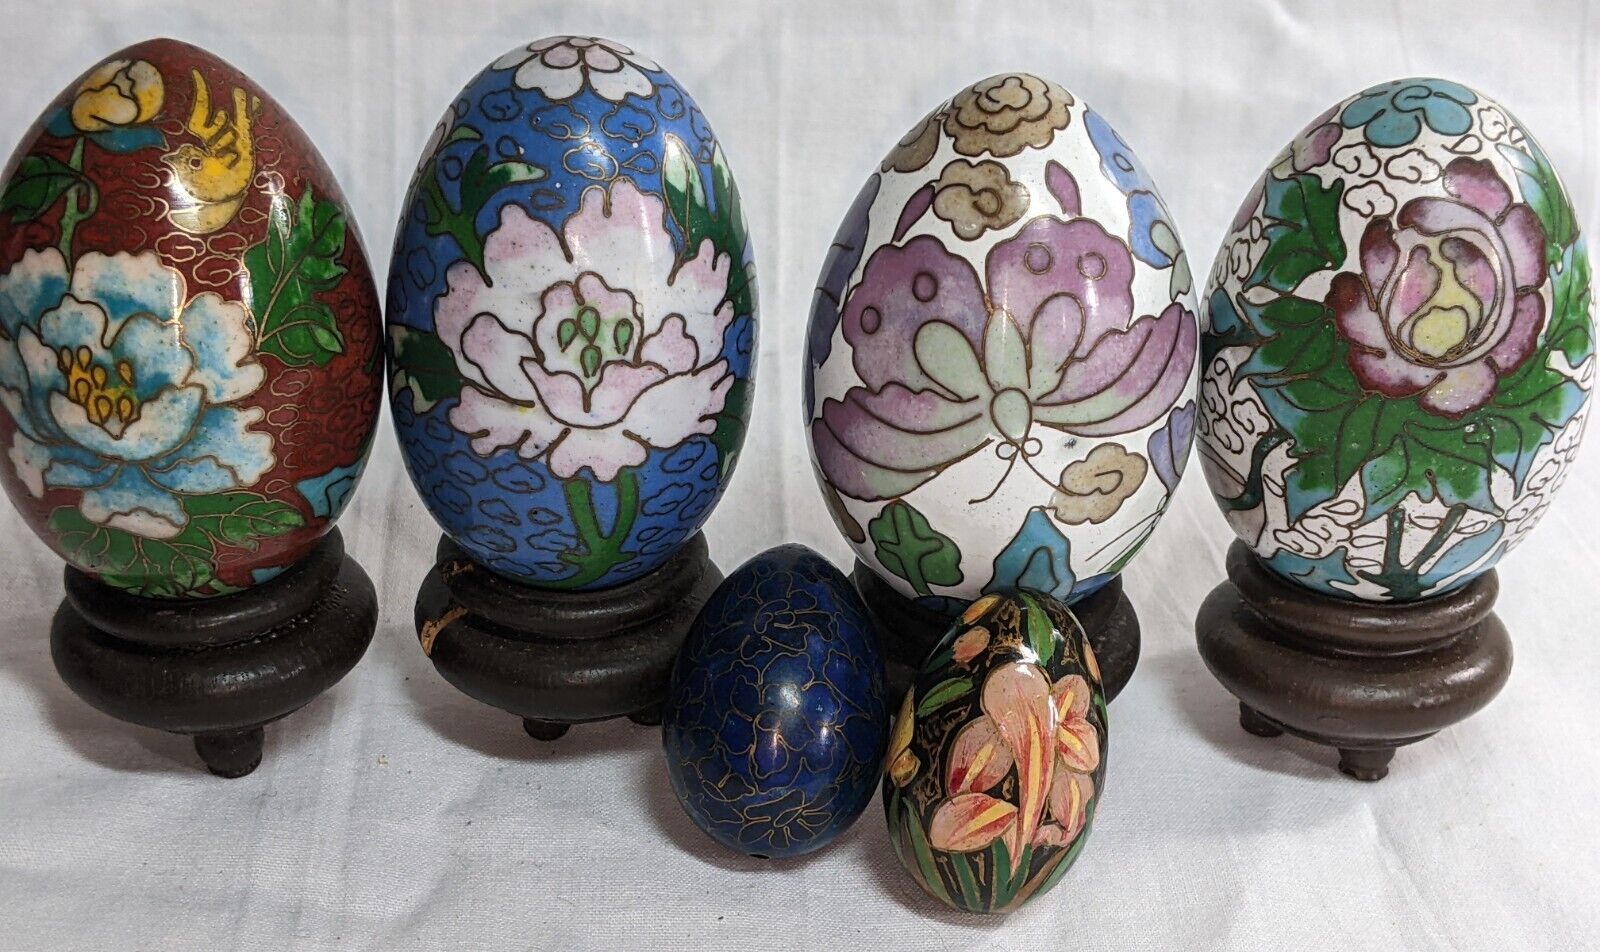 6pcs lot - 5 Vintage Floral Chinese Cloisonne Egg and a Floral Painted Wood Egg